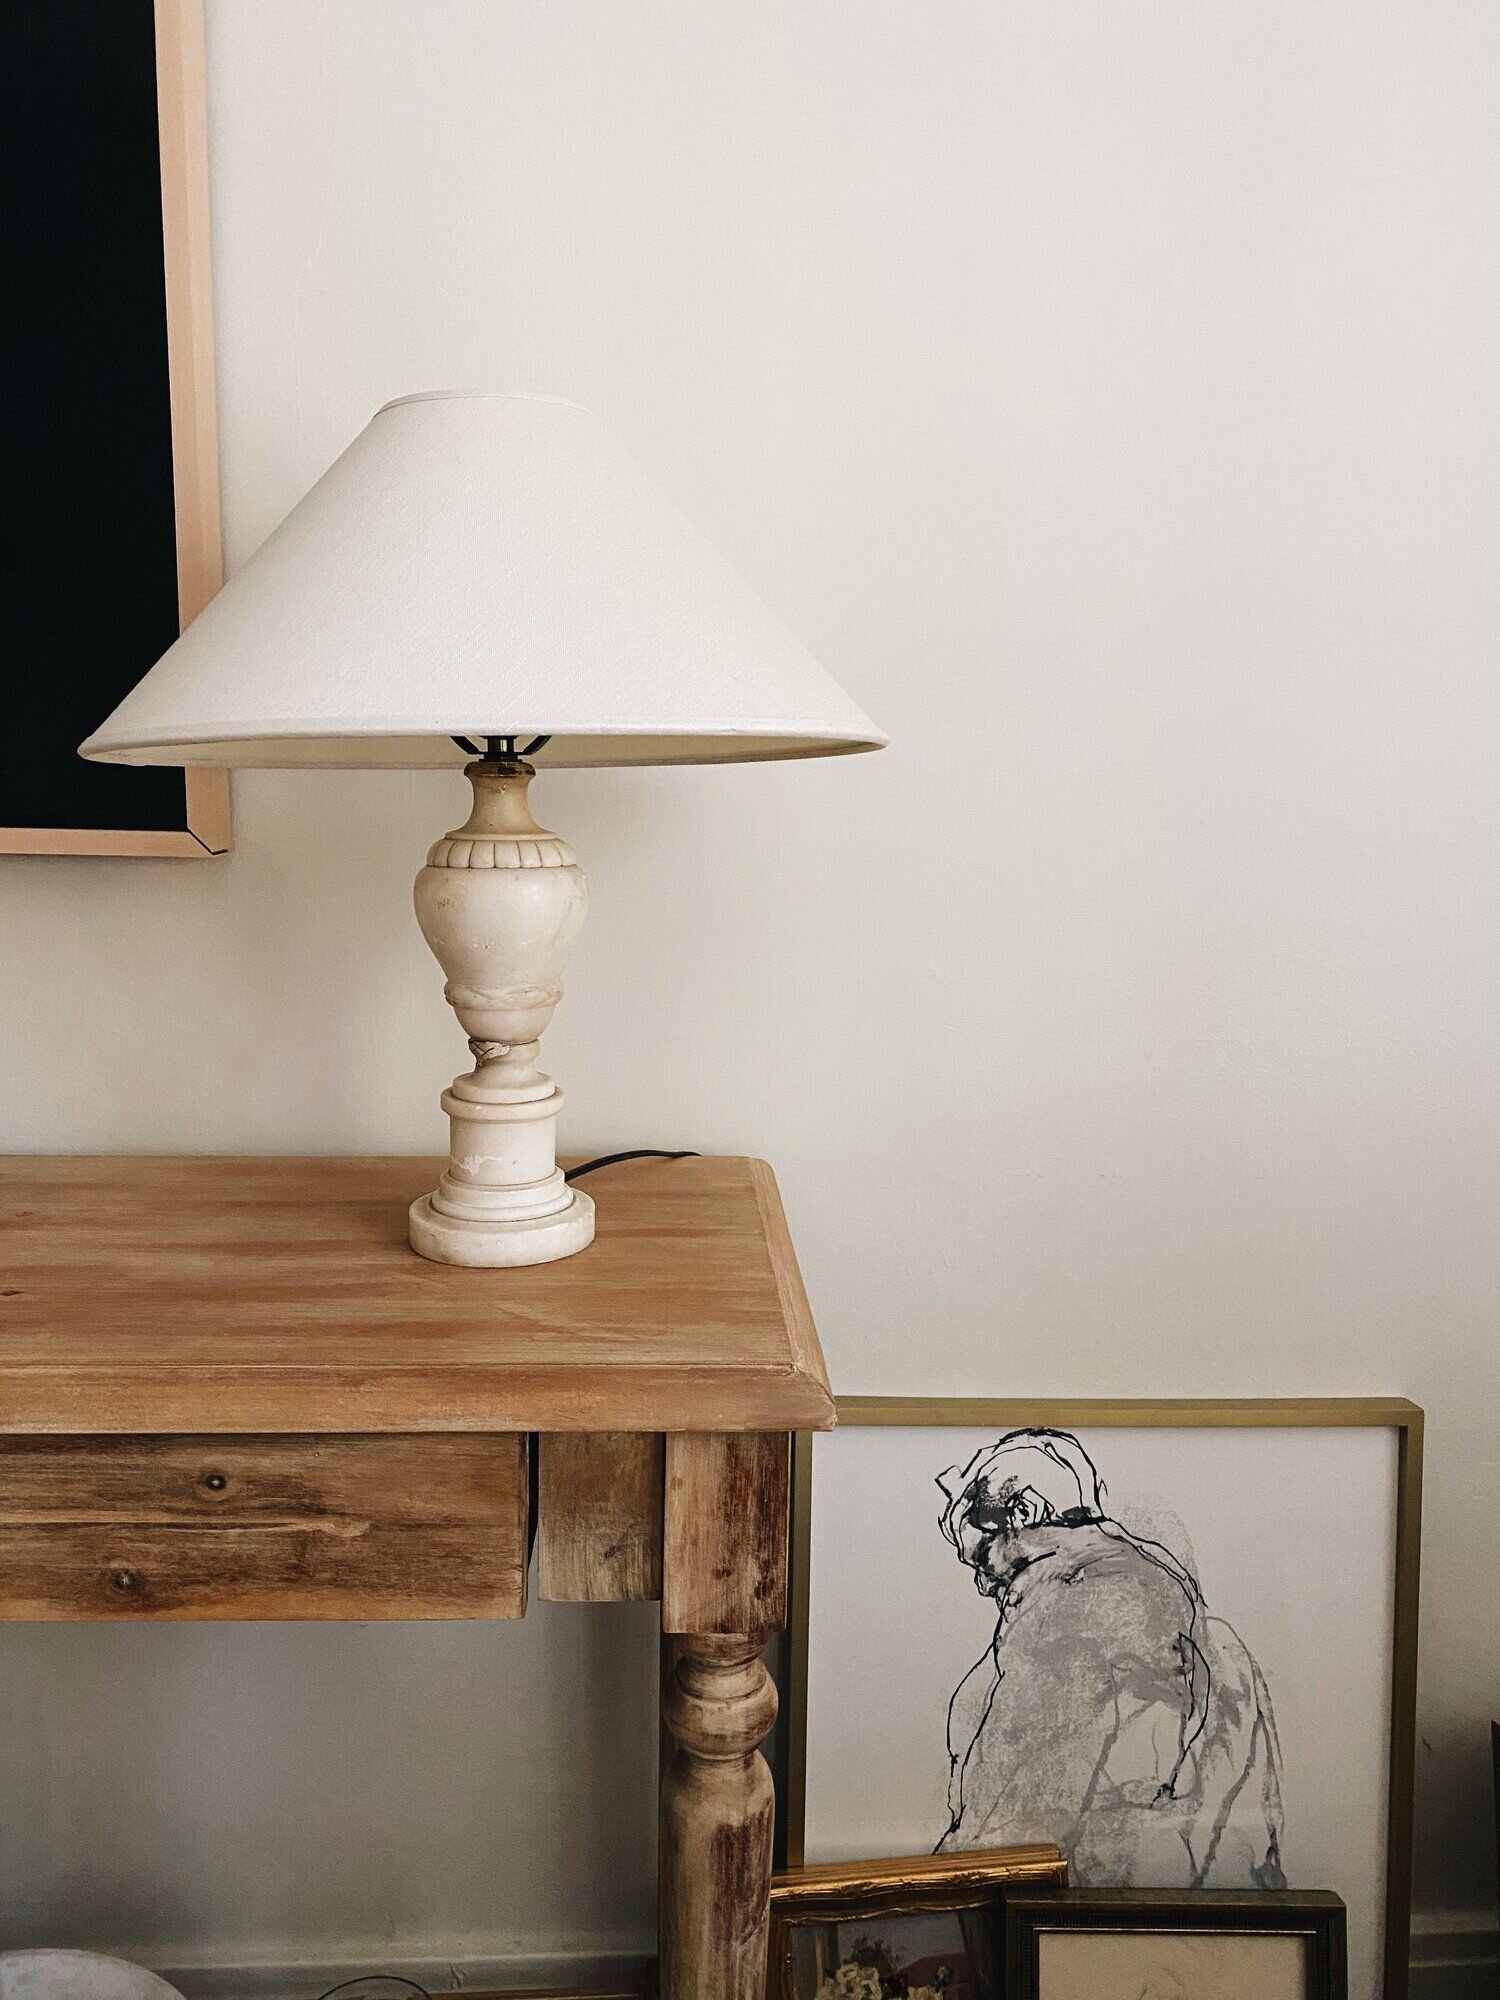 How To Rewire A Vintage Lamp, How To Rewire A Vintage Lamp